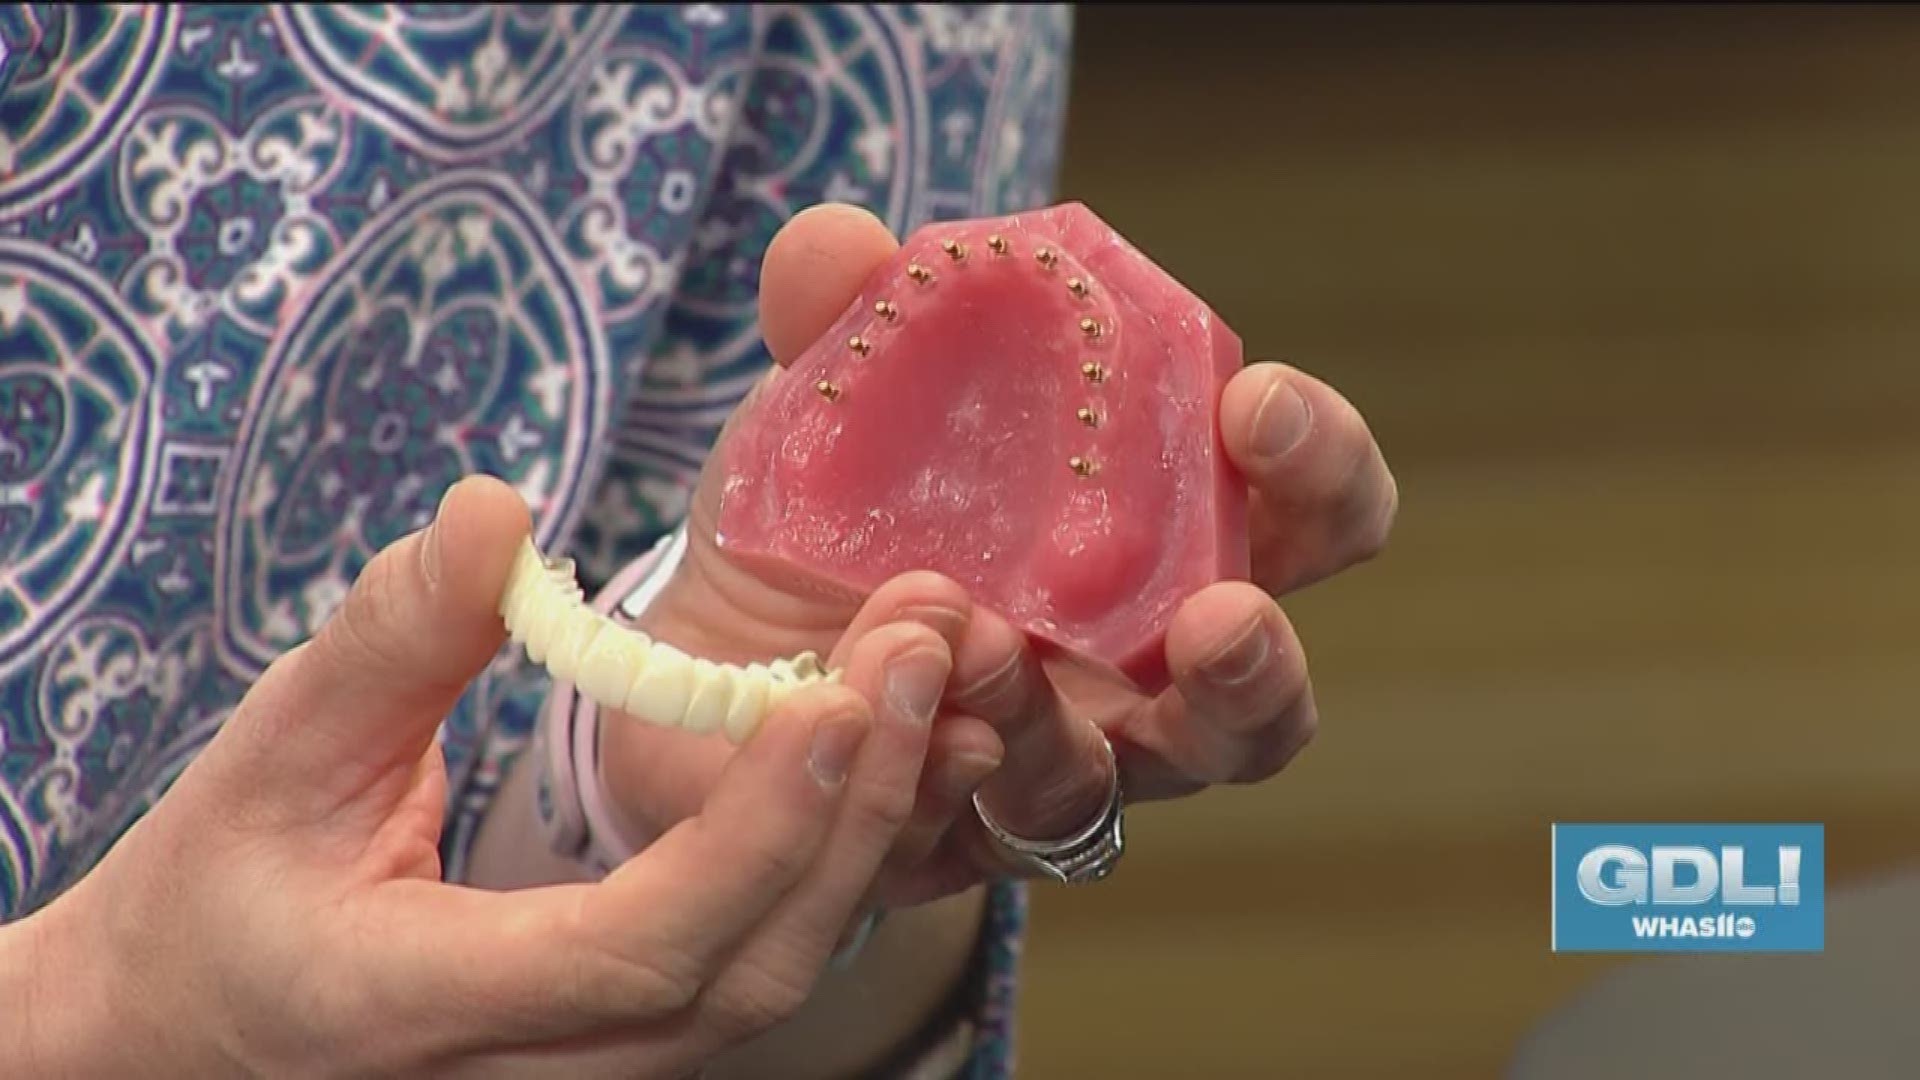 Doctor Regan Ackerman from the Mini Dental Implant Center explains that for half the cost of traditional surgical implants, there's a new, non-invasive procedure can allow you to throw out those old, embarrassing dentures.